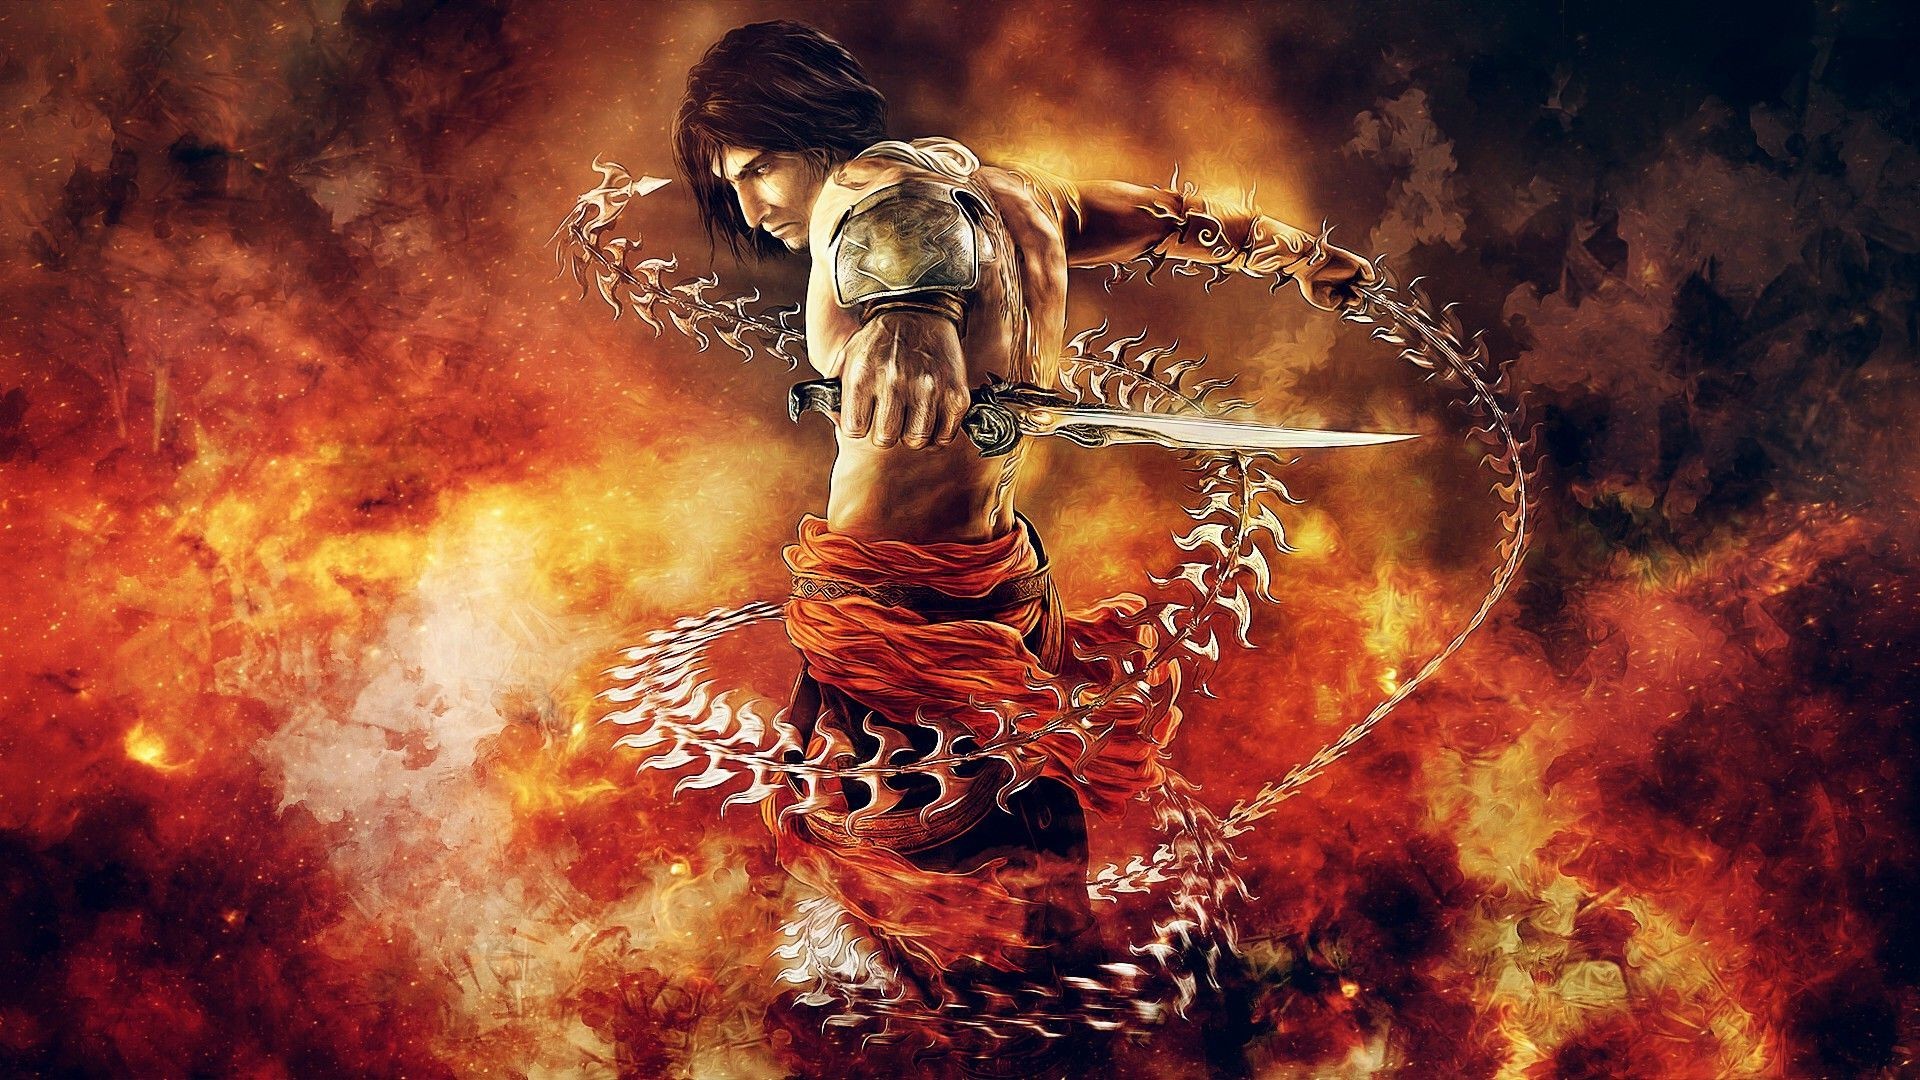 1920x1080 Prince of Persia: Warrior Within wallpaper #26715